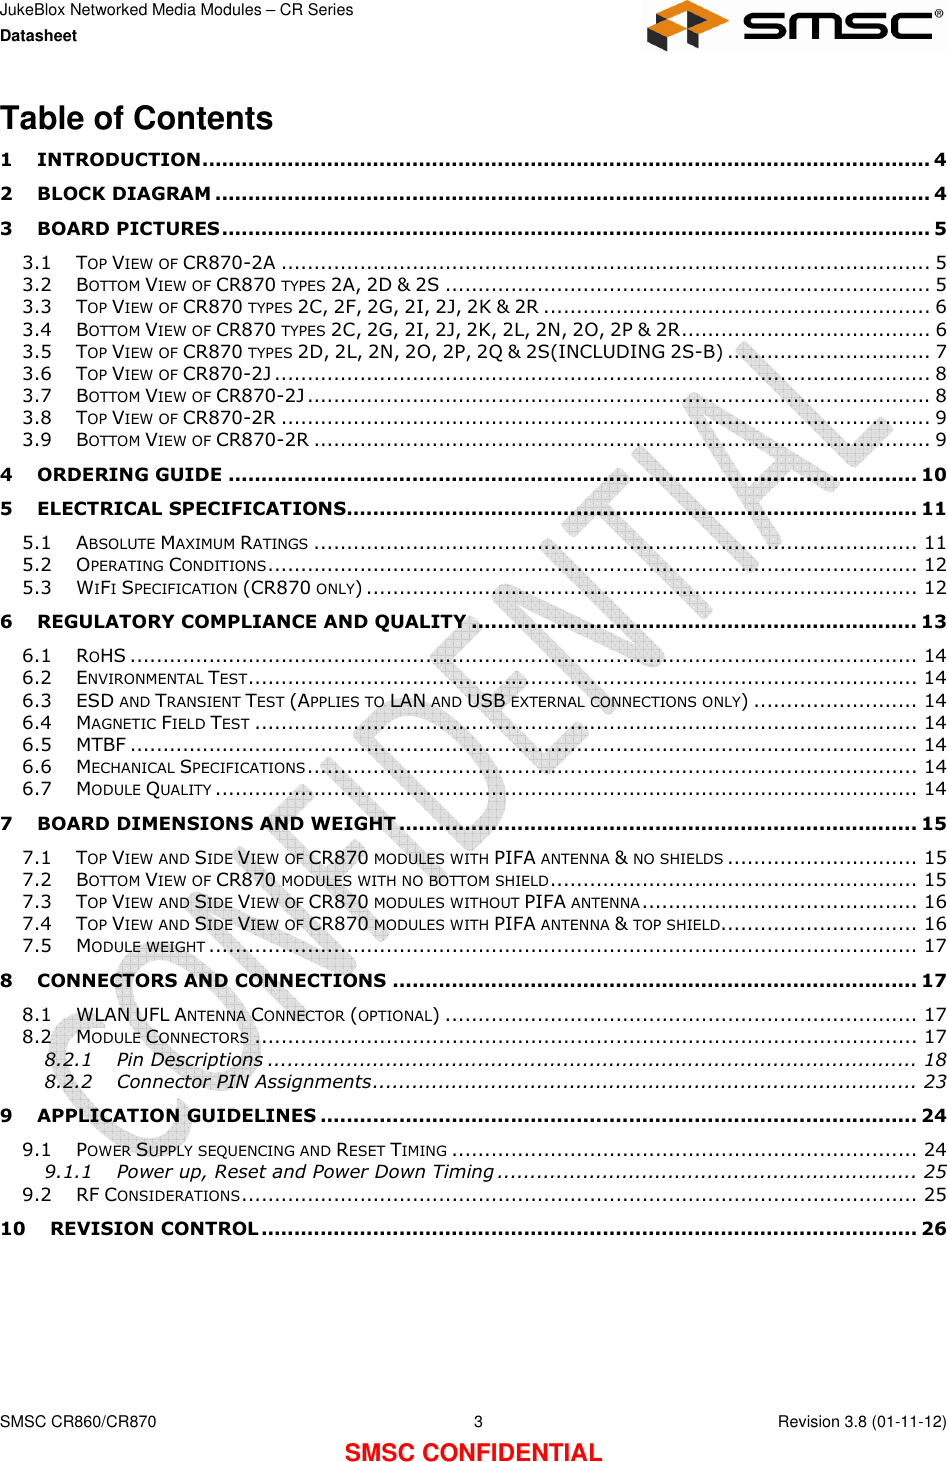 JukeBlox Networked Media Modules – CR Series Datasheet    SMSC CR860/CR870  3    Revision 3.8 (01-11-12) SMSC CONFIDENTIAL Table of Contents 1 INTRODUCTION............................................................................................................... 4 2 BLOCK DIAGRAM ............................................................................................................. 4 3 BOARD PICTURES............................................................................................................ 5 3.1 TOP VIEW OF CR870-2A ................................................................................................... 5 3.2 BOTTOM VIEW OF CR870 TYPES 2A, 2D &amp; 2S .......................................................................... 5 3.3 TOP VIEW OF CR870 TYPES 2C, 2F, 2G, 2I, 2J, 2K &amp; 2R ........................................................... 6 3.4 BOTTOM VIEW OF CR870 TYPES 2C, 2G, 2I, 2J, 2K, 2L, 2N, 2O, 2P &amp; 2R...................................... 6 3.5 TOP VIEW OF CR870 TYPES 2D, 2L, 2N, 2O, 2P, 2Q &amp; 2S(INCLUDING 2S-B) ............................... 7 3.6 TOP VIEW OF CR870-2J .................................................................................................... 8 3.7 BOTTOM VIEW OF CR870-2J ............................................................................................... 8 3.8 TOP VIEW OF CR870-2R ................................................................................................... 9 3.9 BOTTOM VIEW OF CR870-2R .............................................................................................. 9 4 ORDERING GUIDE ......................................................................................................... 10 5 ELECTRICAL SPECIFICATIONS....................................................................................... 11 5.1 ABSOLUTE MAXIMUM RATINGS............................................................................................ 11 5.2 OPERATING CONDITIONS................................................................................................... 12 5.3 WIFI SPECIFICATION (CR870 ONLY) .................................................................................... 12 6 REGULATORY COMPLIANCE AND QUALITY .................................................................... 13 6.1 ROHS ........................................................................................................................ 14 6.2 ENVIRONMENTAL TEST...................................................................................................... 14 6.3 ESD AND TRANSIENT TEST (APPLIES TO LAN AND USB EXTERNAL CONNECTIONS ONLY) ......................... 14 6.4 MAGNETIC FIELD TEST..................................................................................................... 14 6.5 MTBF ........................................................................................................................ 14 6.6 MECHANICAL SPECIFICATIONS............................................................................................. 14 6.7 MODULE QUALITY........................................................................................................... 14 7 BOARD DIMENSIONS AND WEIGHT ............................................................................... 15 7.1 TOP VIEW AND SIDE VIEW OF CR870 MODULES WITH PIFA ANTENNA &amp; NO SHIELDS............................. 15 7.2 BOTTOM VIEW OF CR870 MODULES WITH NO BOTTOM SHIELD........................................................ 15 7.3 TOP VIEW AND SIDE VIEW OF CR870 MODULES WITHOUT PIFA ANTENNA.......................................... 16 7.4 TOP VIEW AND SIDE VIEW OF CR870 MODULES WITH PIFA ANTENNA &amp; TOP SHIELD.............................. 16 7.5 MODULE WEIGHT............................................................................................................ 17 8 CONNECTORS AND CONNECTIONS ................................................................................ 17 8.1 WLAN UFL ANTENNA CONNECTOR (OPTIONAL) ........................................................................ 17 8.2 MODULE CONNECTORS..................................................................................................... 17 8.2.1 Pin Descriptions ................................................................................................... 18 8.2.2 Connector PIN Assignments................................................................................... 23 9 APPLICATION GUIDELINES ........................................................................................... 24 9.1 POWER SUPPLY SEQUENCING AND RESET TIMING....................................................................... 24 9.1.1 Power up, Reset and Power Down Timing ................................................................ 25 9.2 RF CONSIDERATIONS....................................................................................................... 25 10 REVISION CONTROL.................................................................................................... 26  